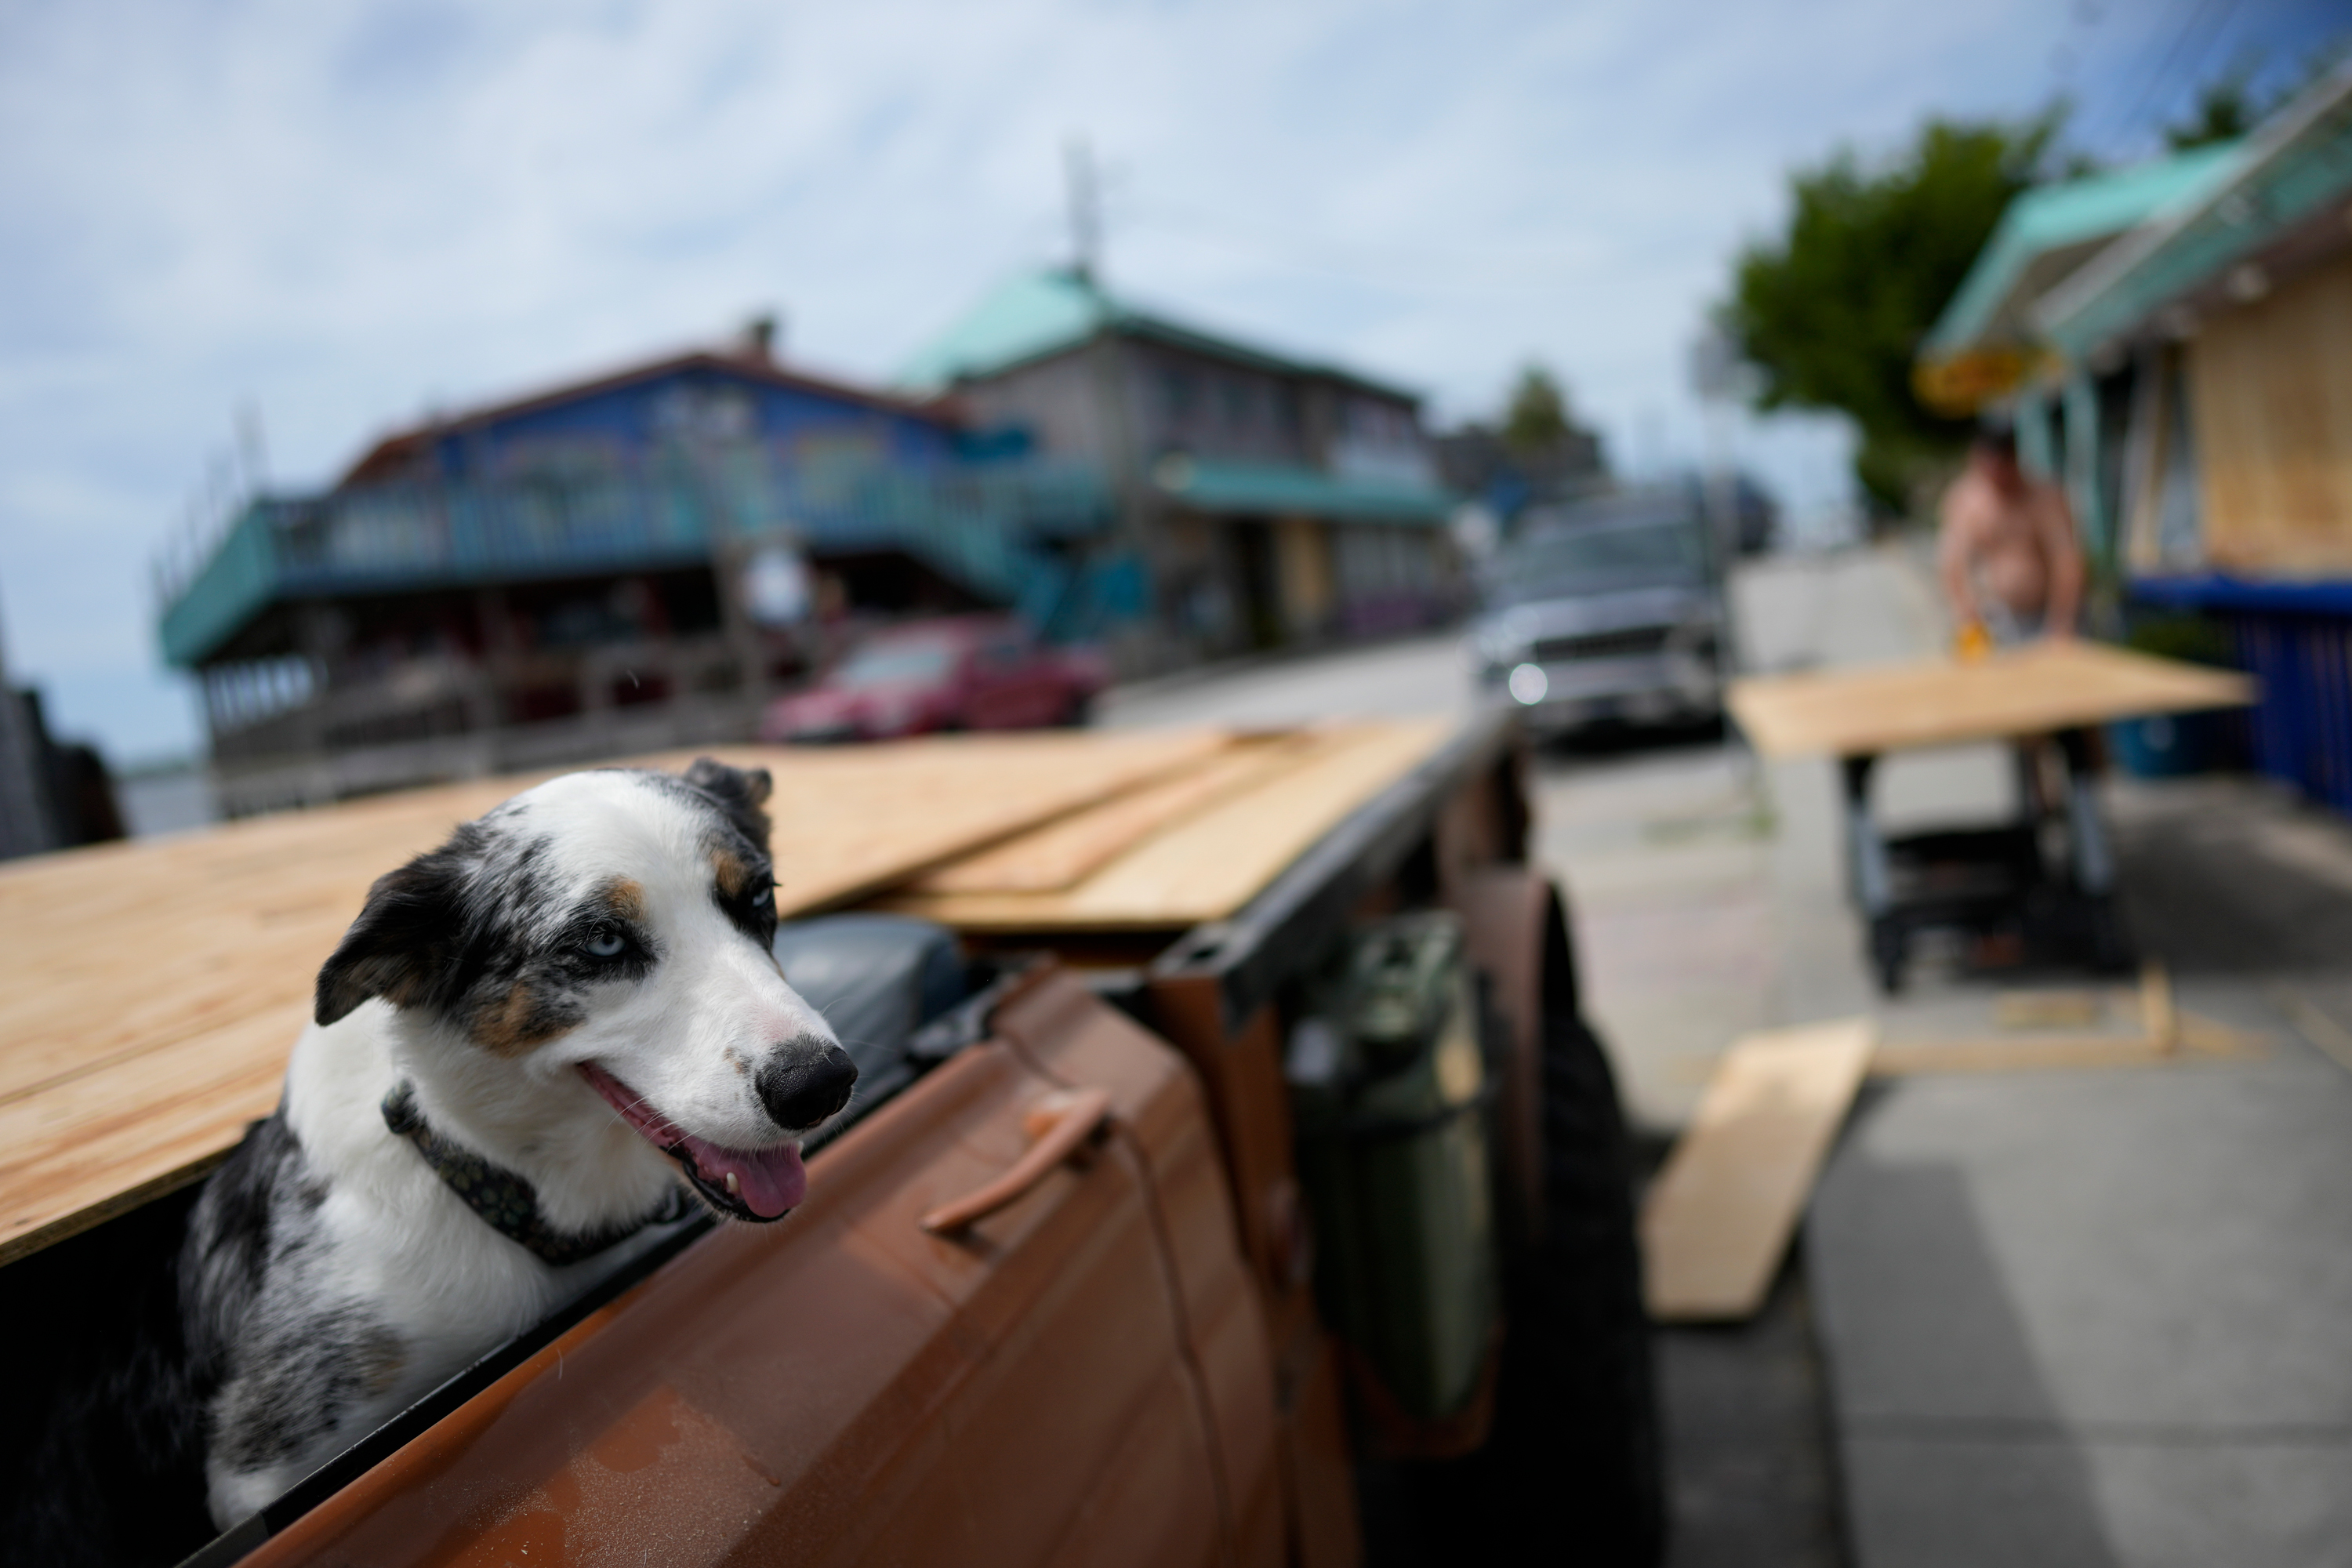 Jeff Wigsten, right, cuts plywood to help cover a business' windows as his dog Blue waits in his car, ahead of the expected arrival of Hurricane Idalia, on August 29, in Cedar Key, Florida.